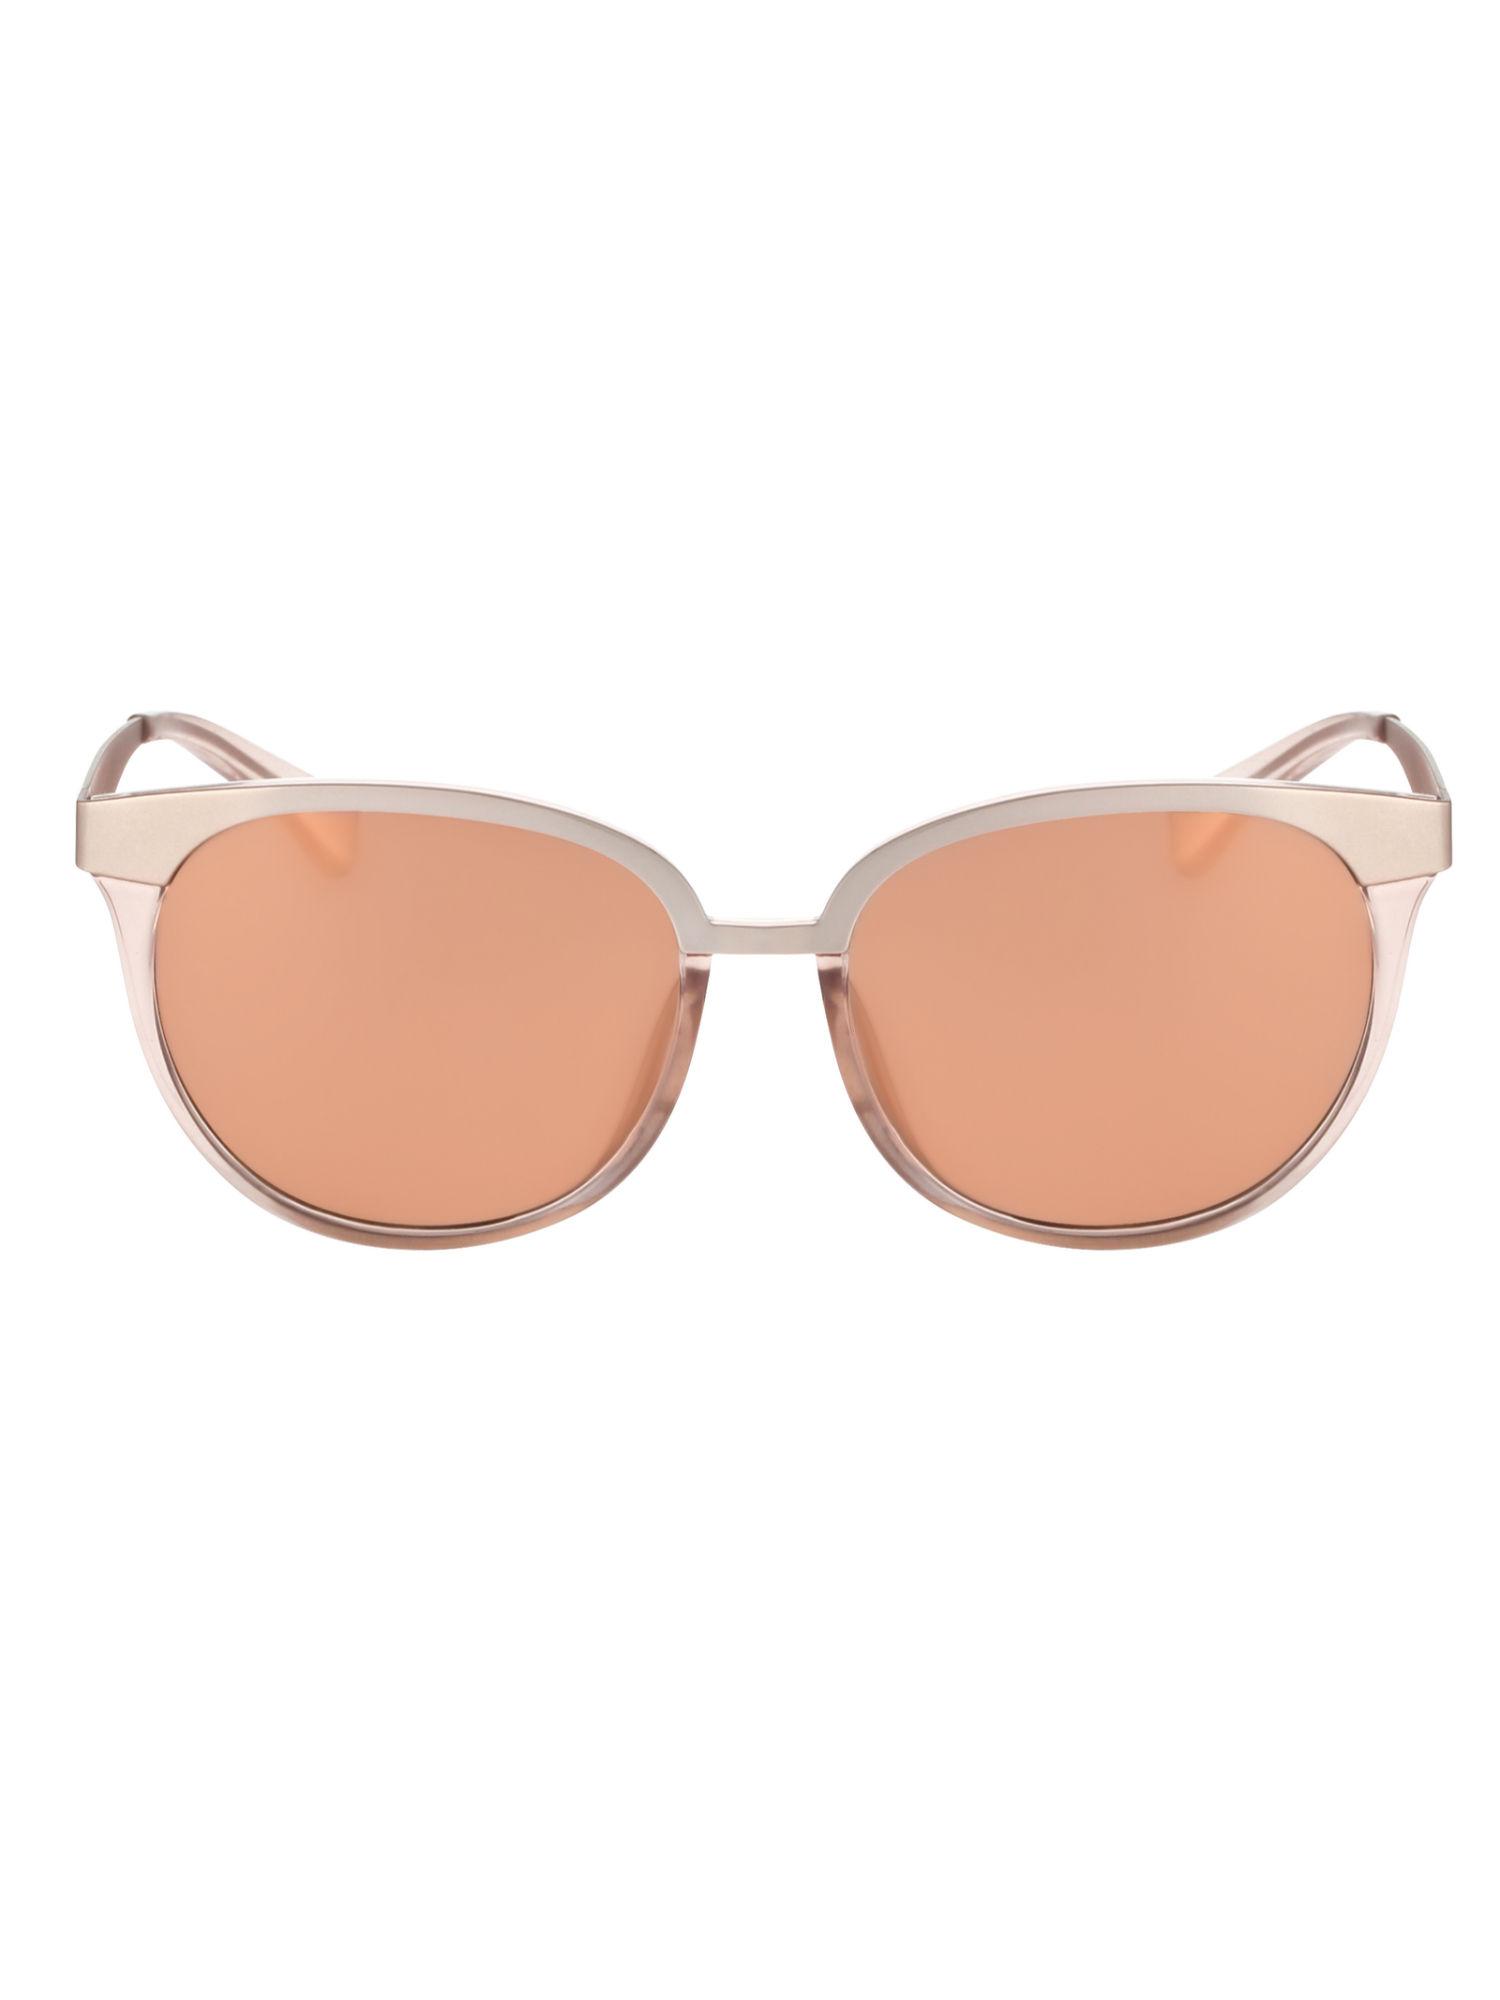 round sunglasses with peach lens for unisex